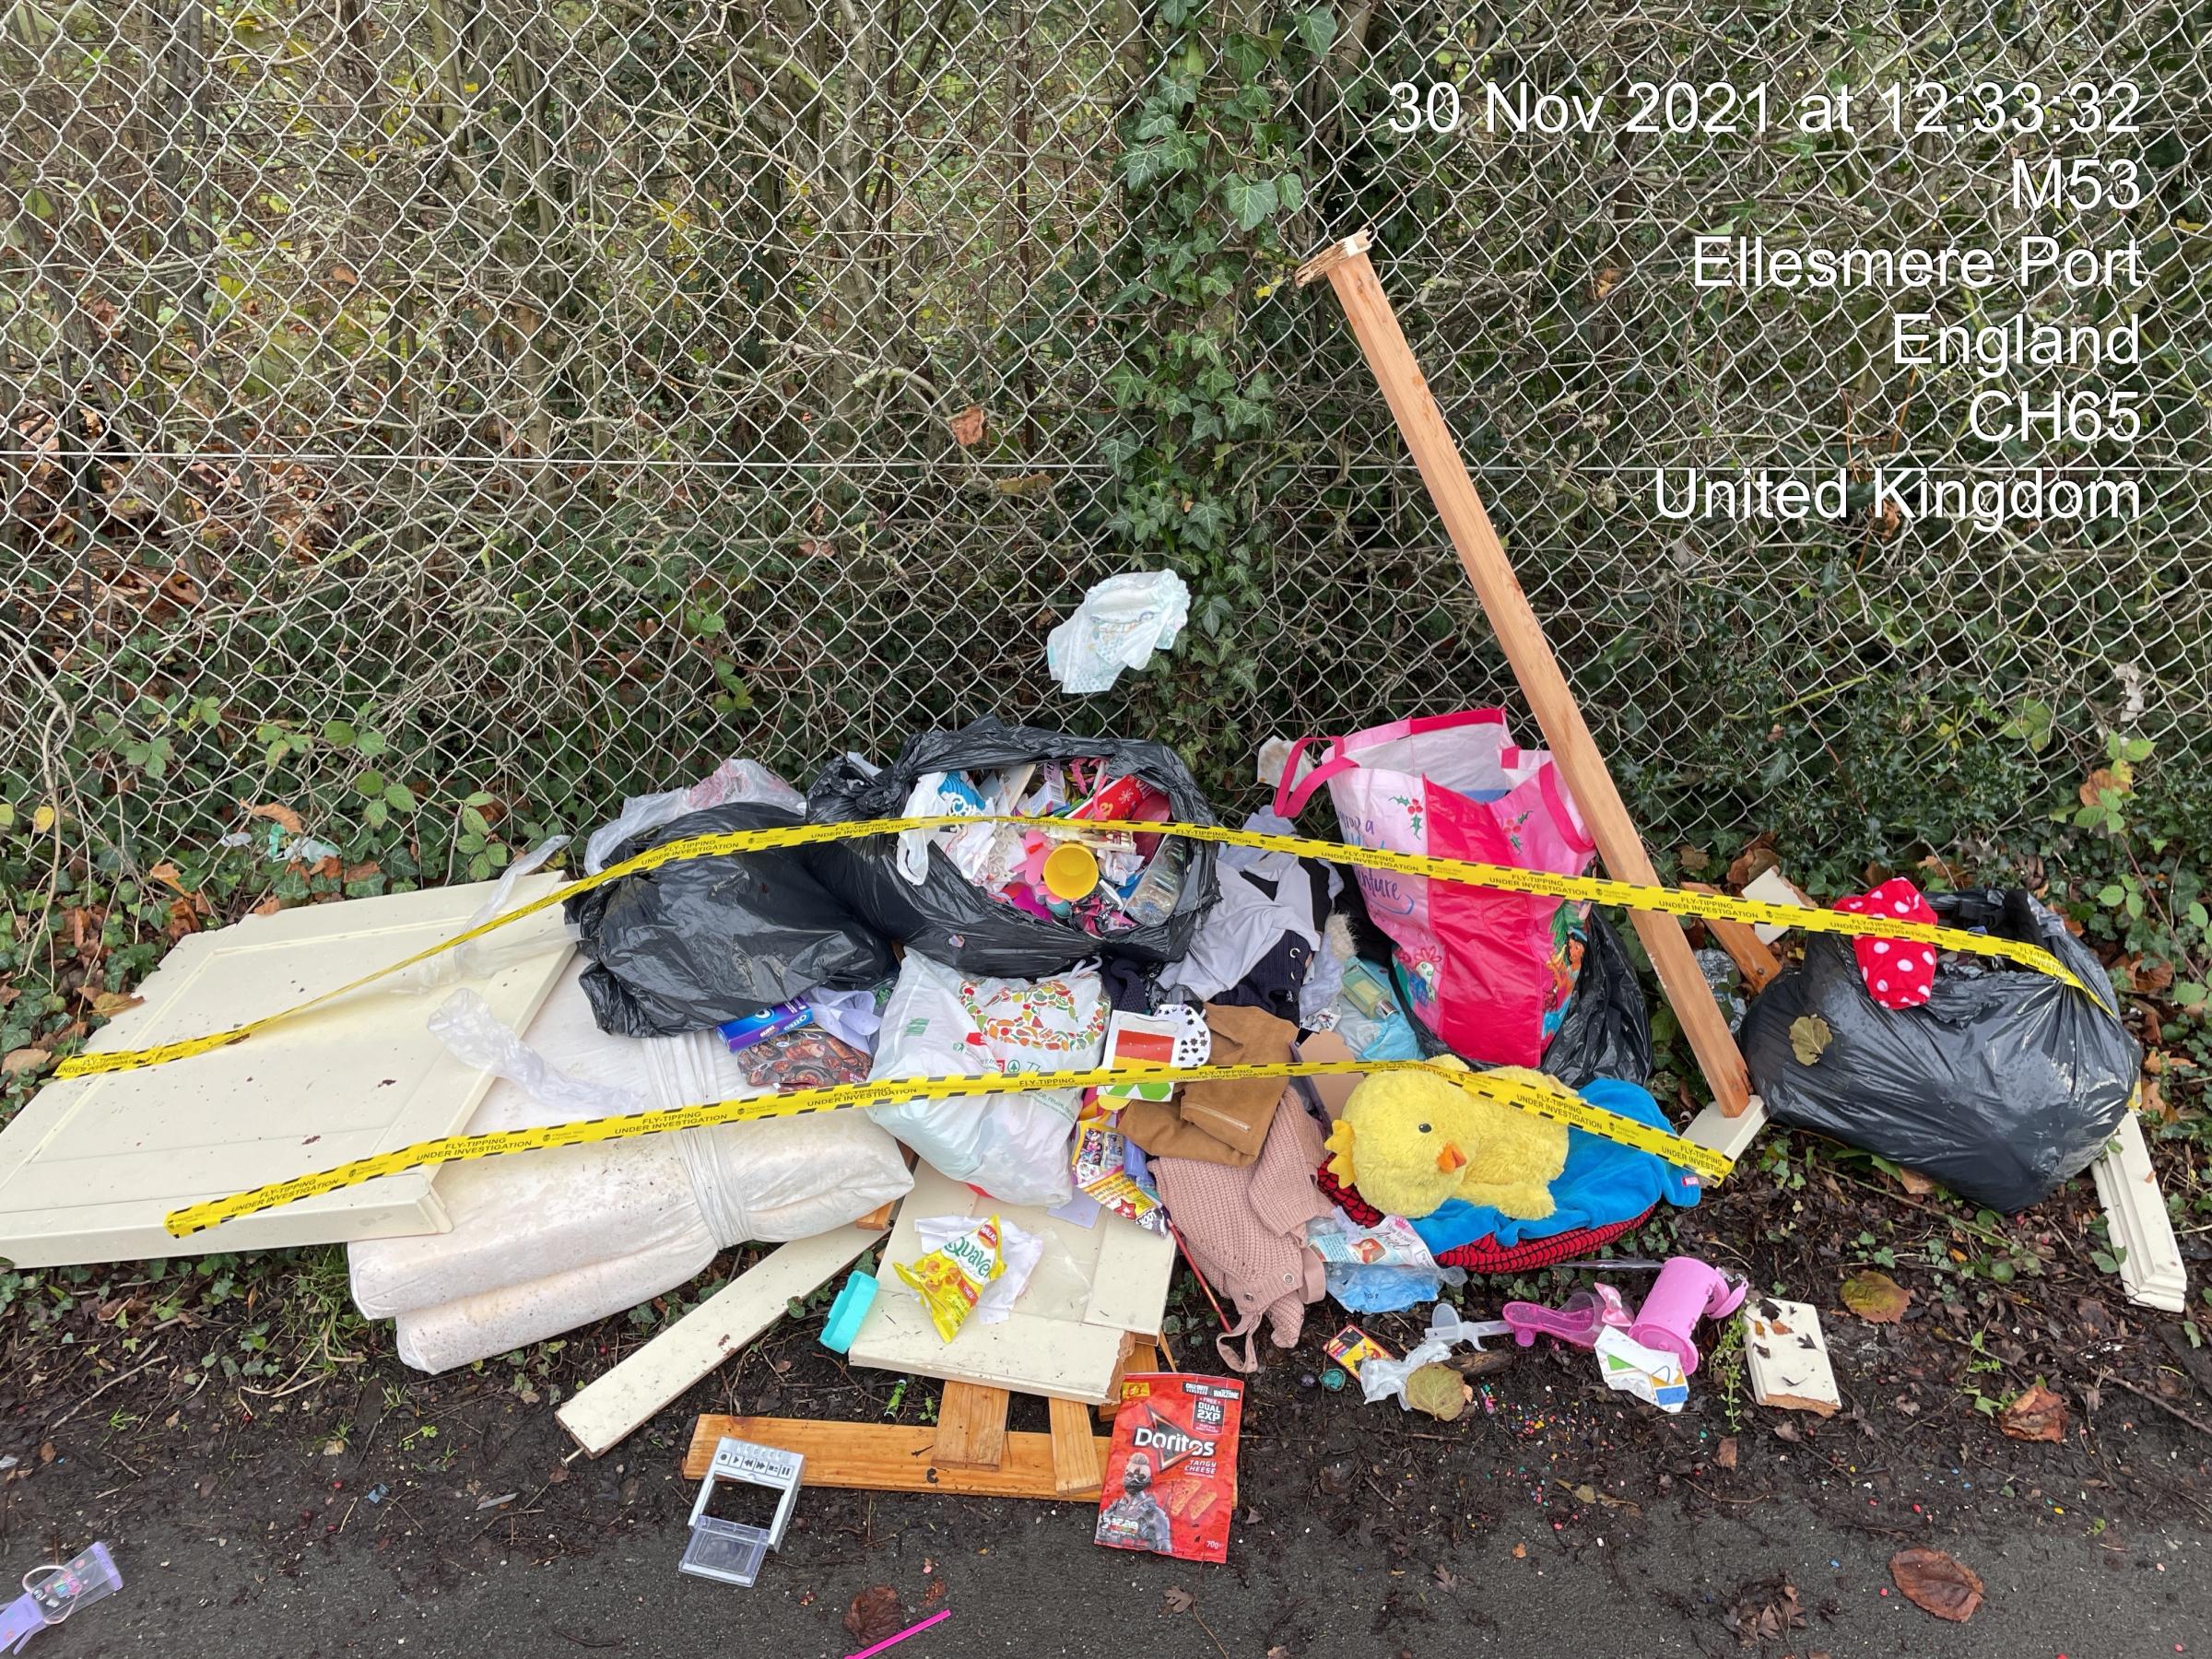 The offender who dumped this waste illegally on the M53 was fined within hours.